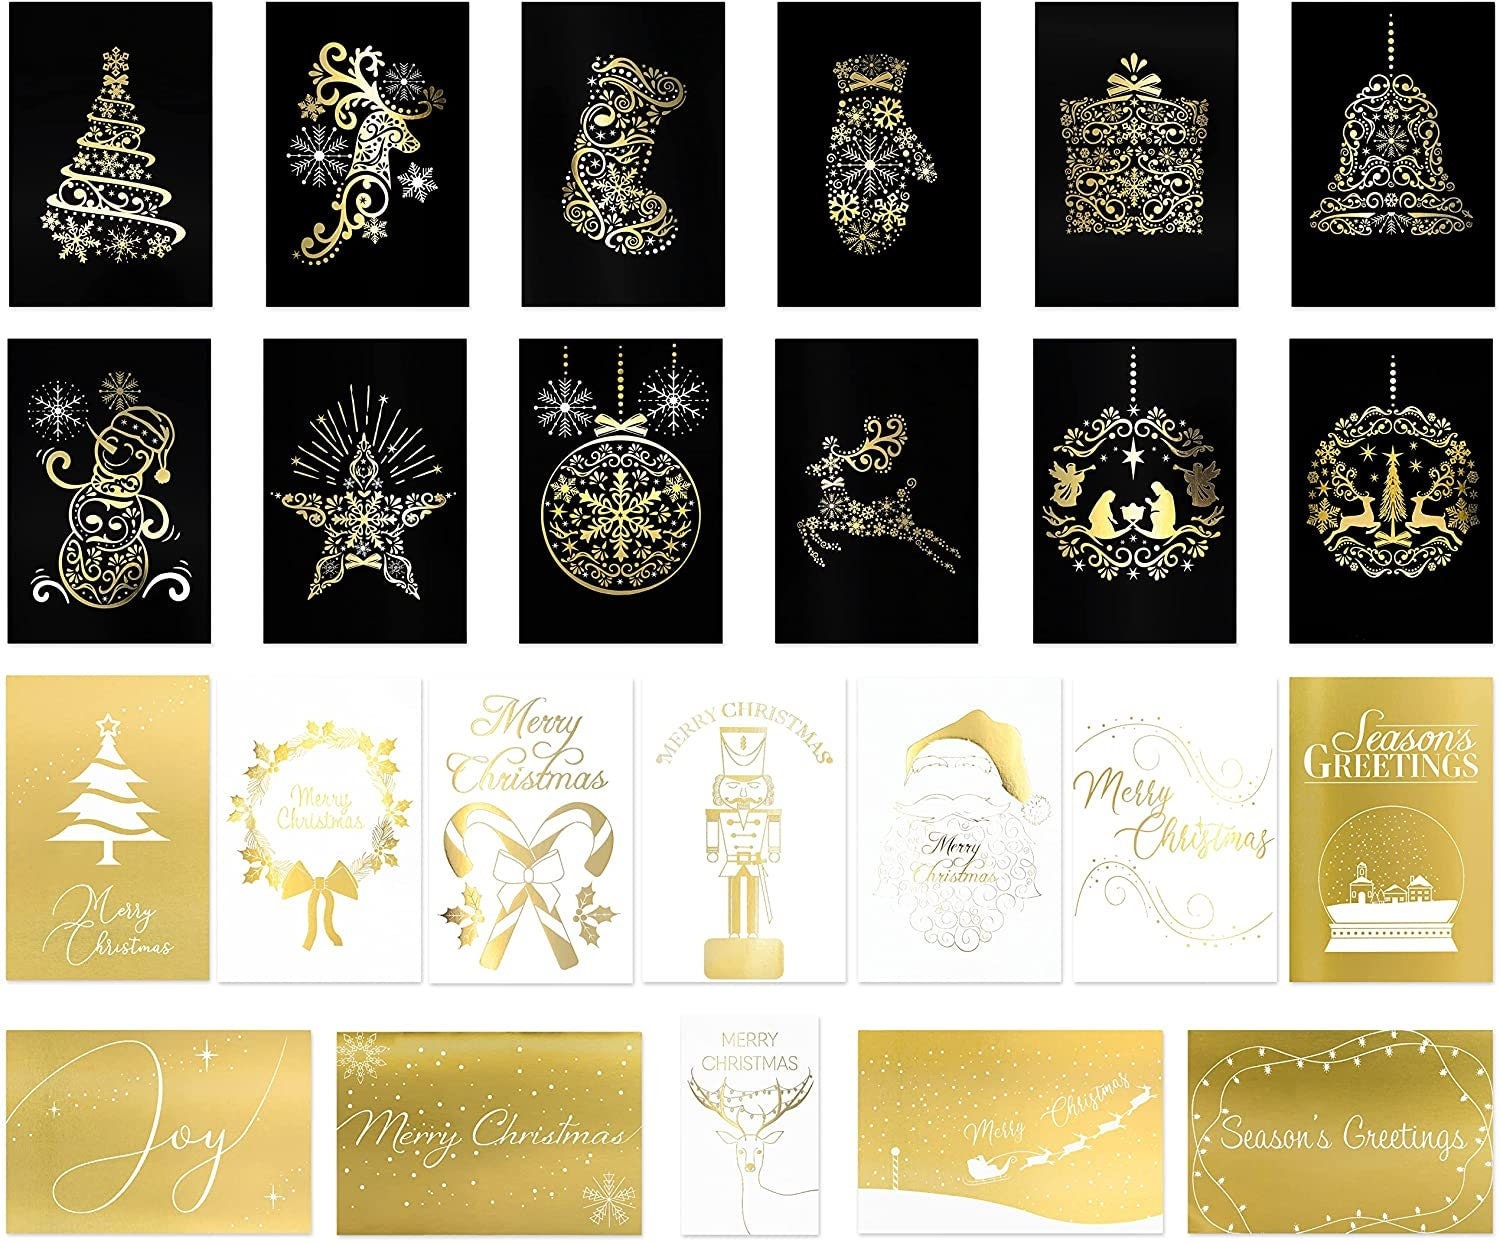 Colorful Images Golden Merry Christmas Christmas Cards - Set of 24 Cards, Envelopes and Seals, Card Stock, 5 x 7 Inches